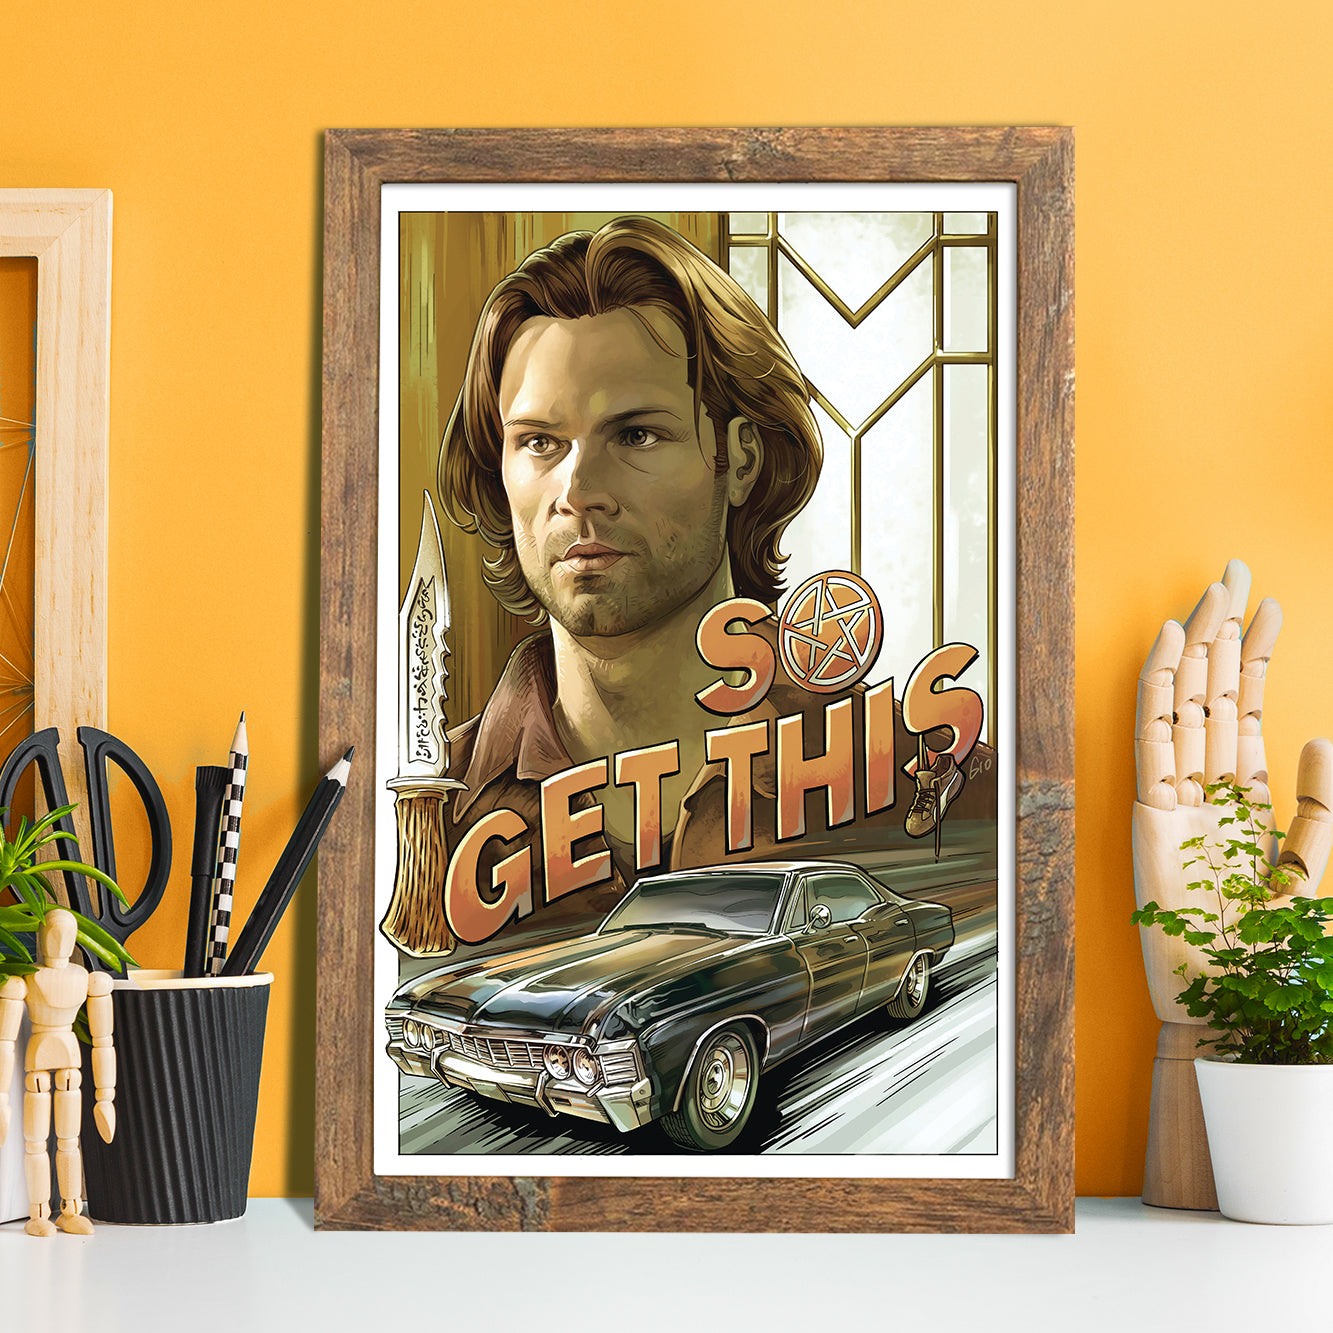 A framed drawing of Sam Winchester's face. Under the face is a 1967 Chevy Impala, with orand text above it saying "so get this." The O in the text contains the anti-possession symbol. Behind the drawing is a yellow wall. On either side are artist's tool and wooden models.